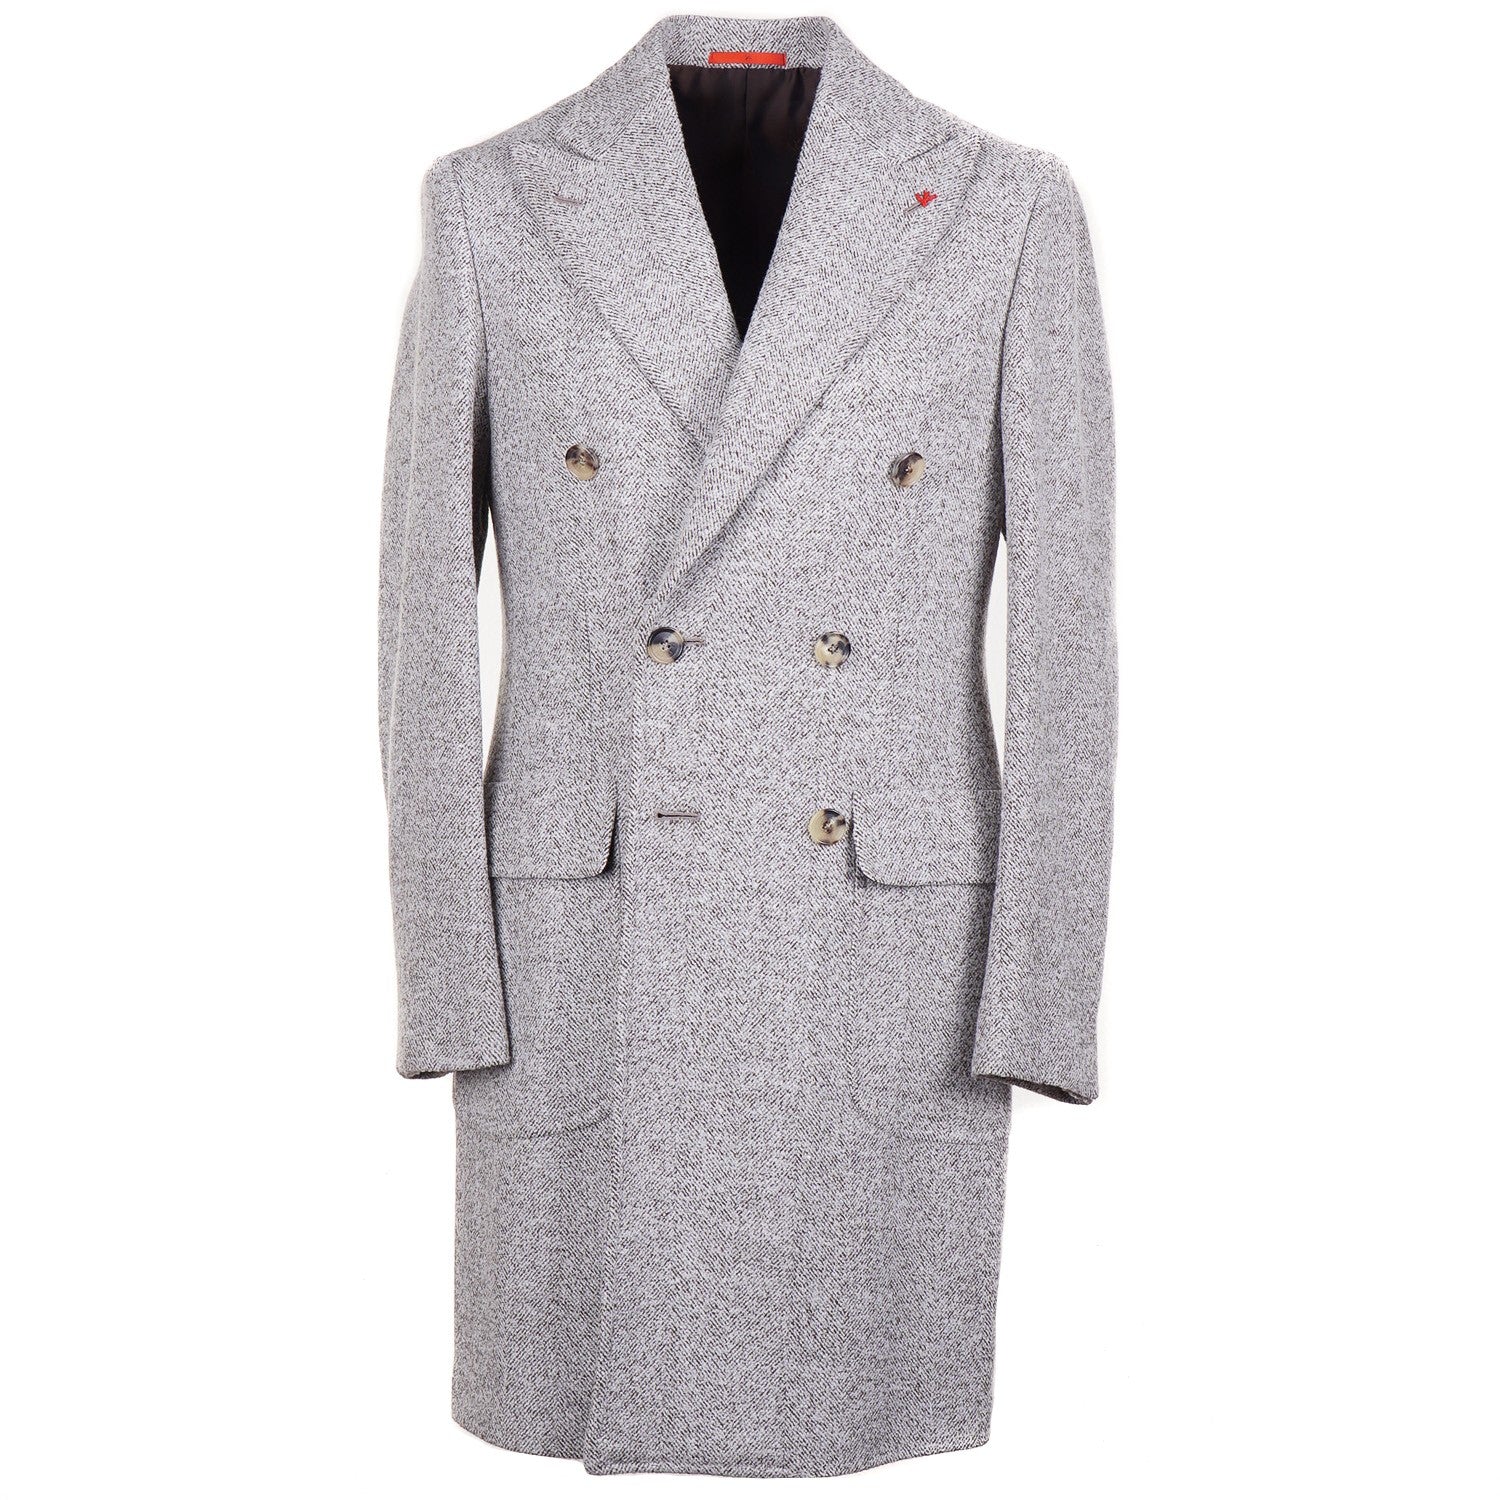 Isaia Slim-Fit Patterned Wool Overcoat - Top Shelf Apparel